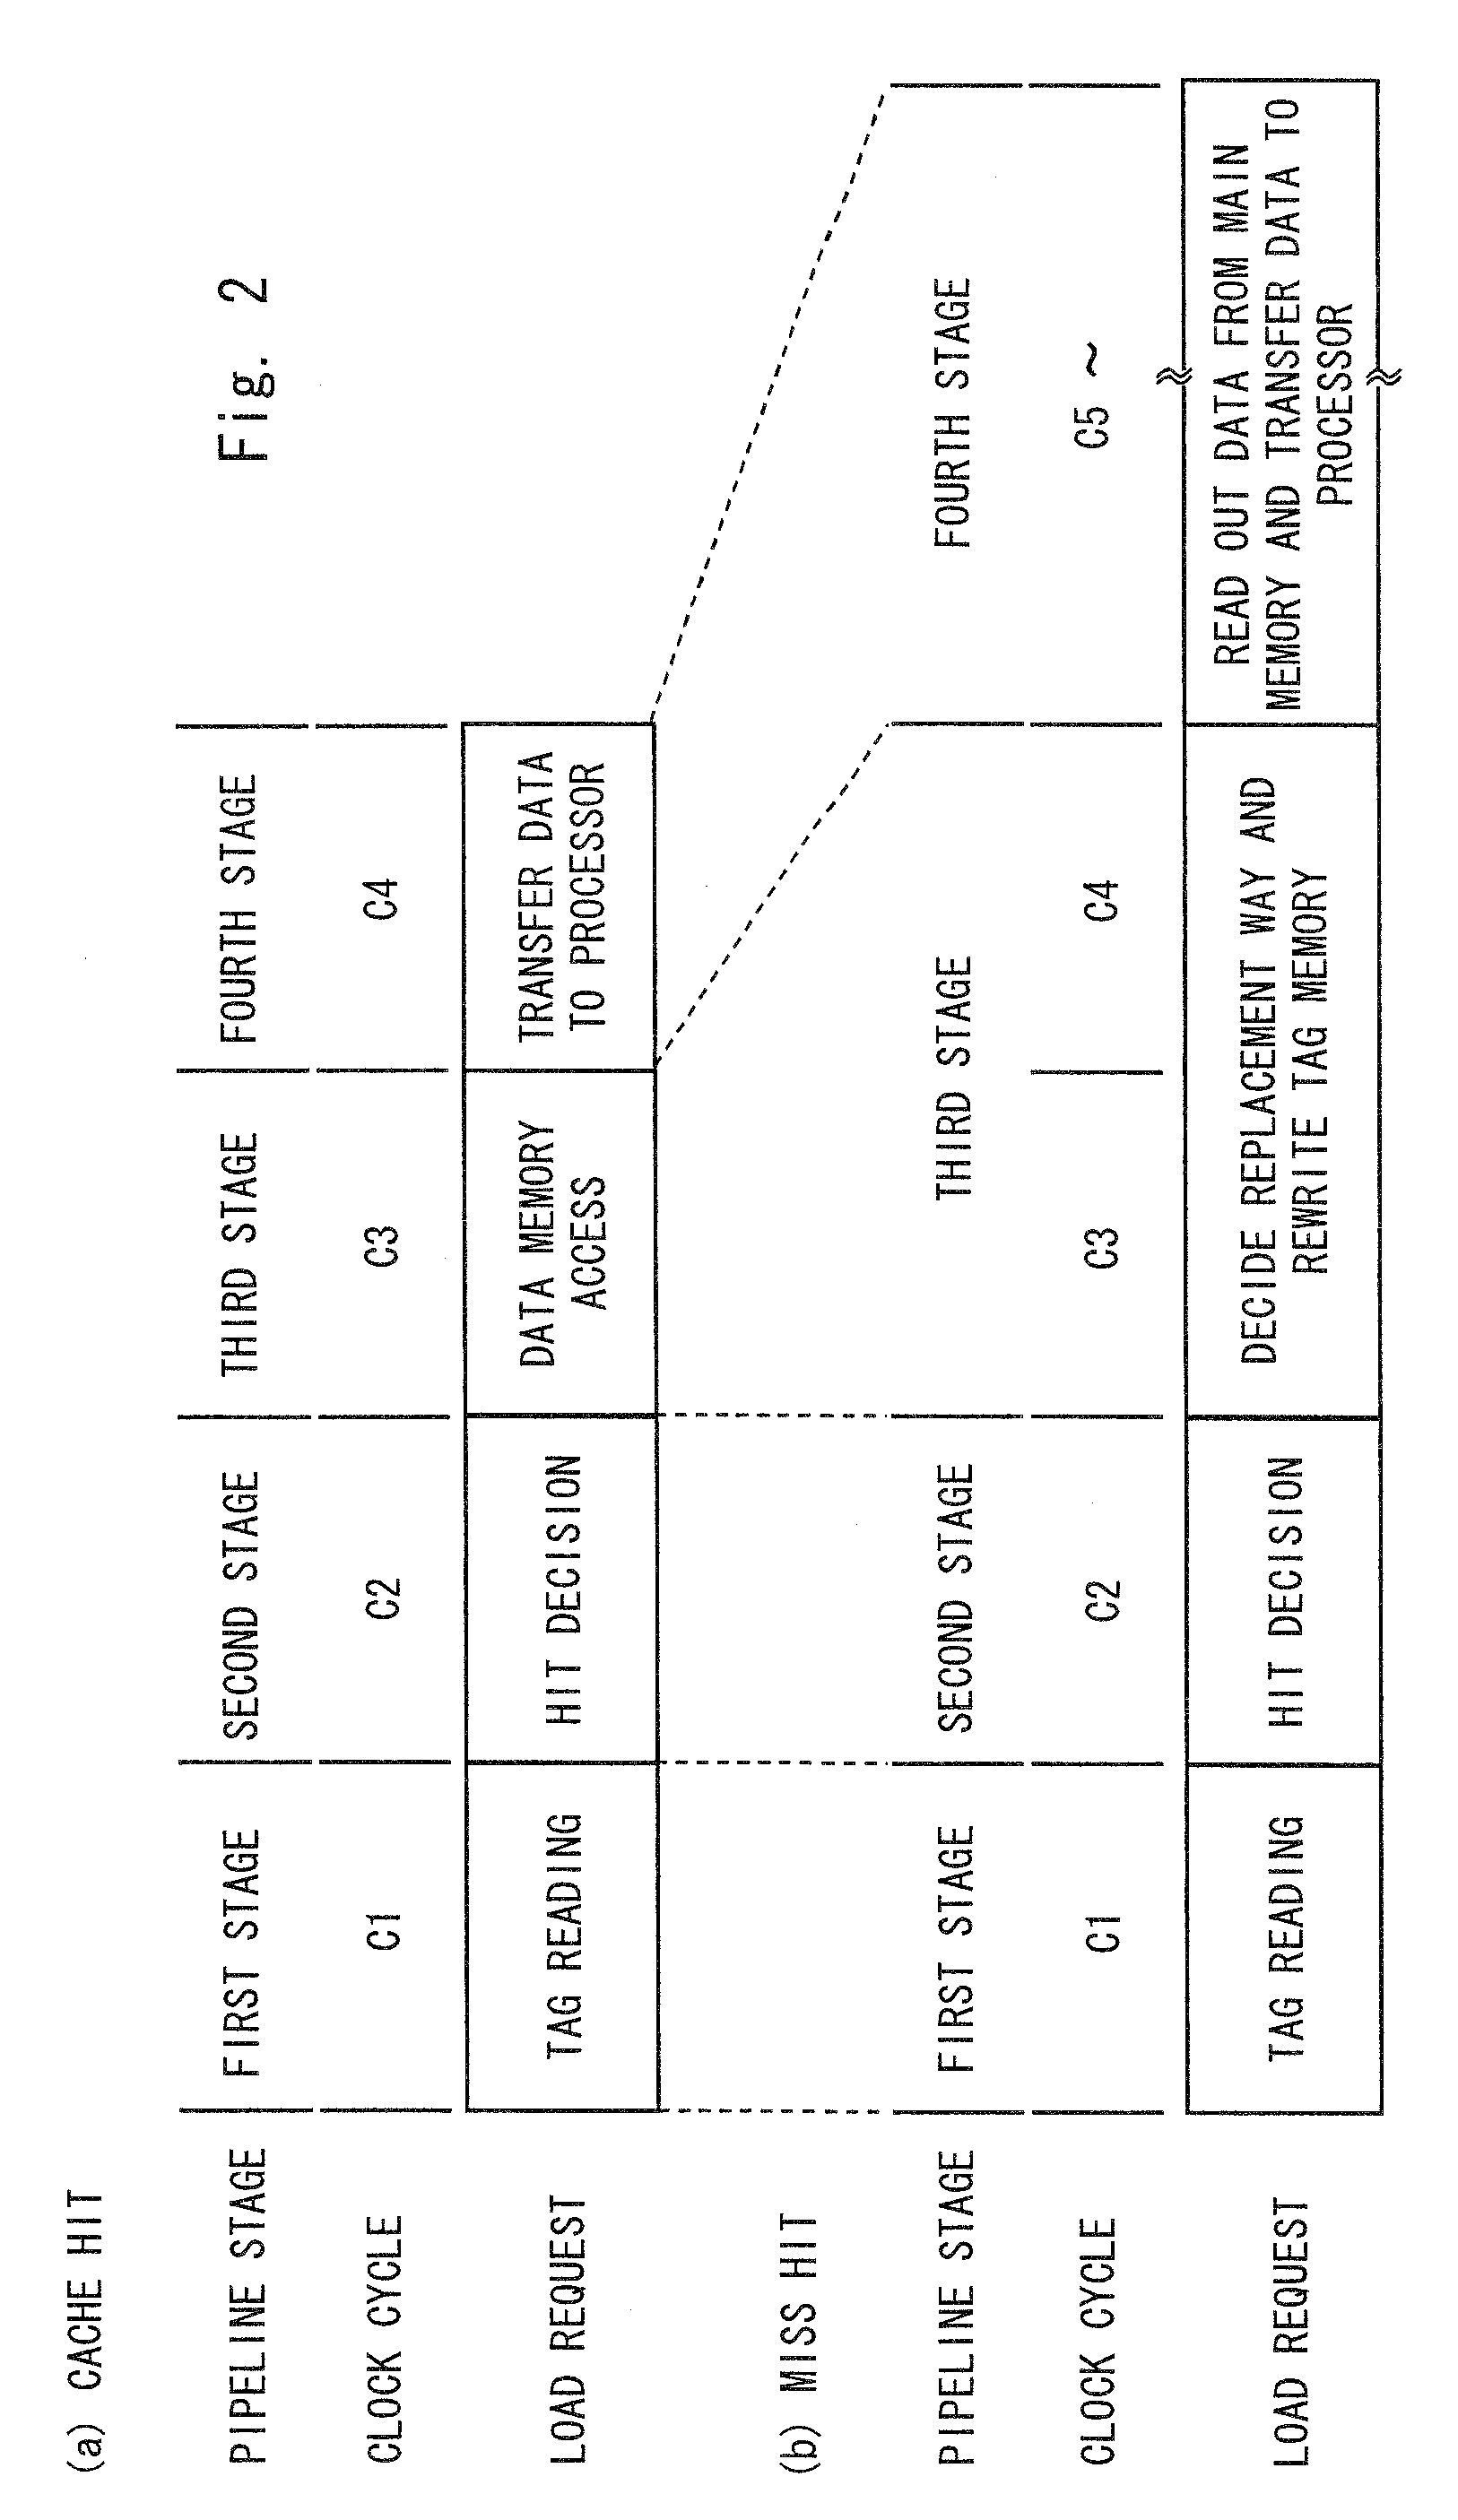 Cache memory having pipeline structure and method for controlling the same